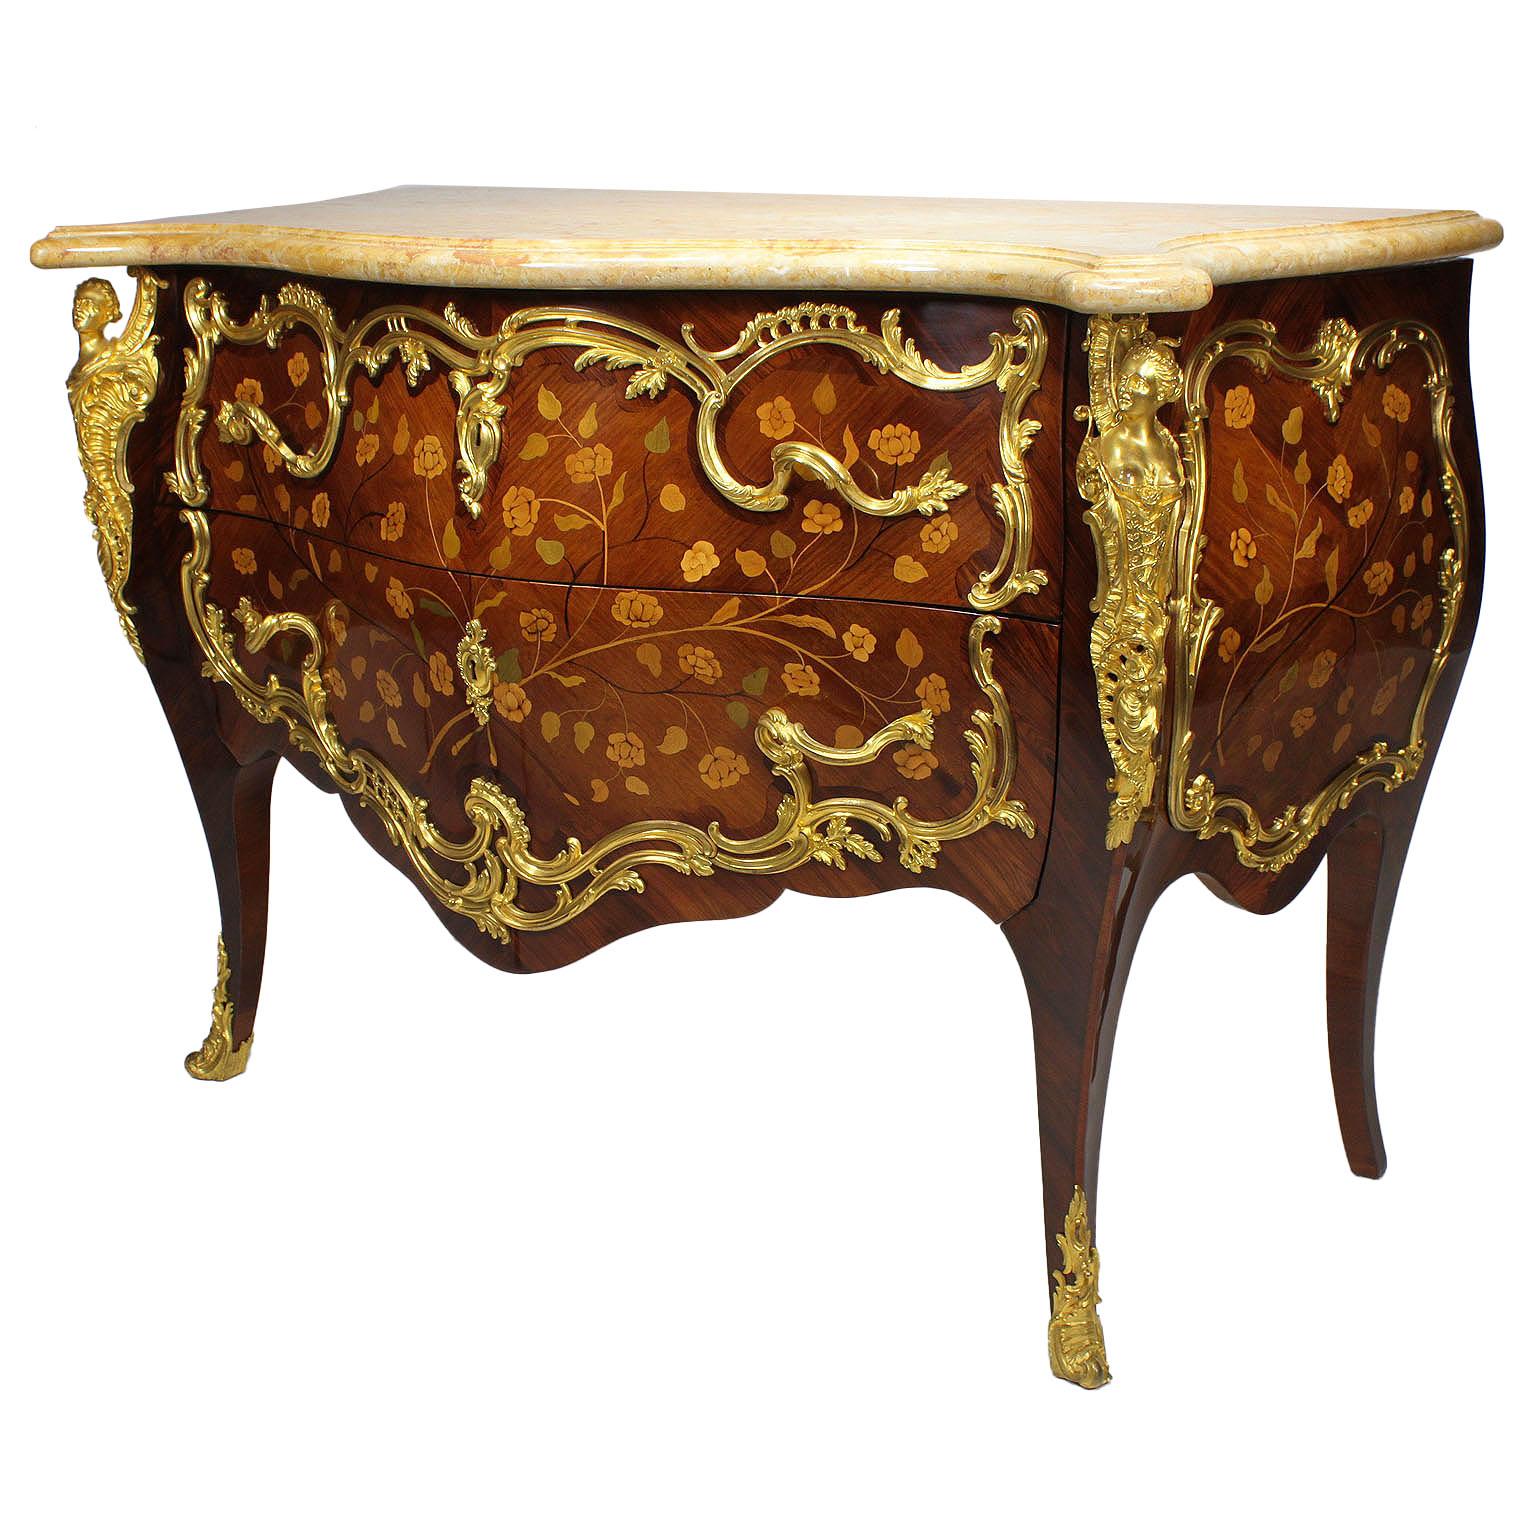 A very fine pair of French 19th century Louis XV style gilt bronze-mounted floral marquetry Bombé commodes with marble-top. The later serpentine Beige Perlato marble tops above a conforming case decorated with panels of scrolling flora and fauna and